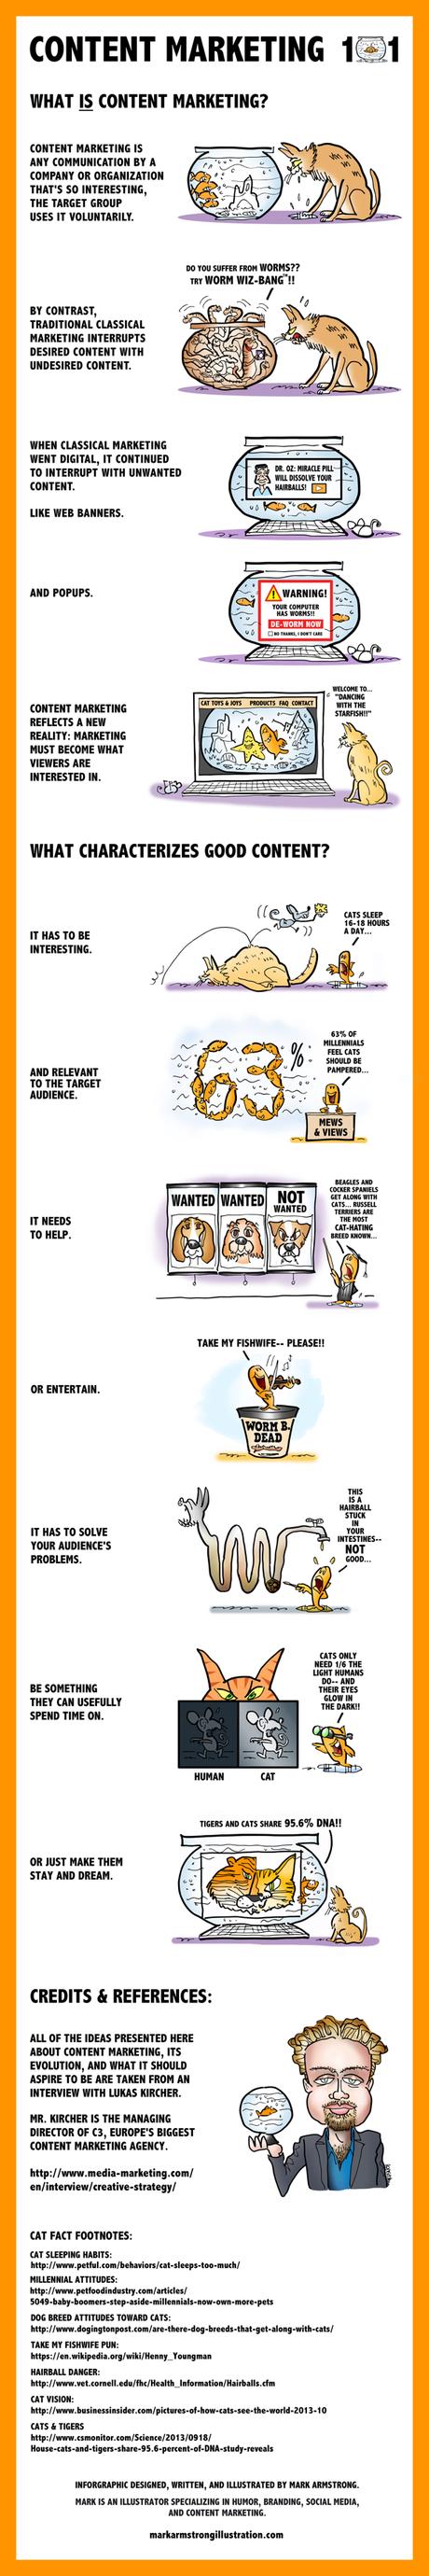 infographic which explains content marketing how it differs from traditional marketing characteristics of good content cat facts based on interview with Lukas Kircher managing director C3